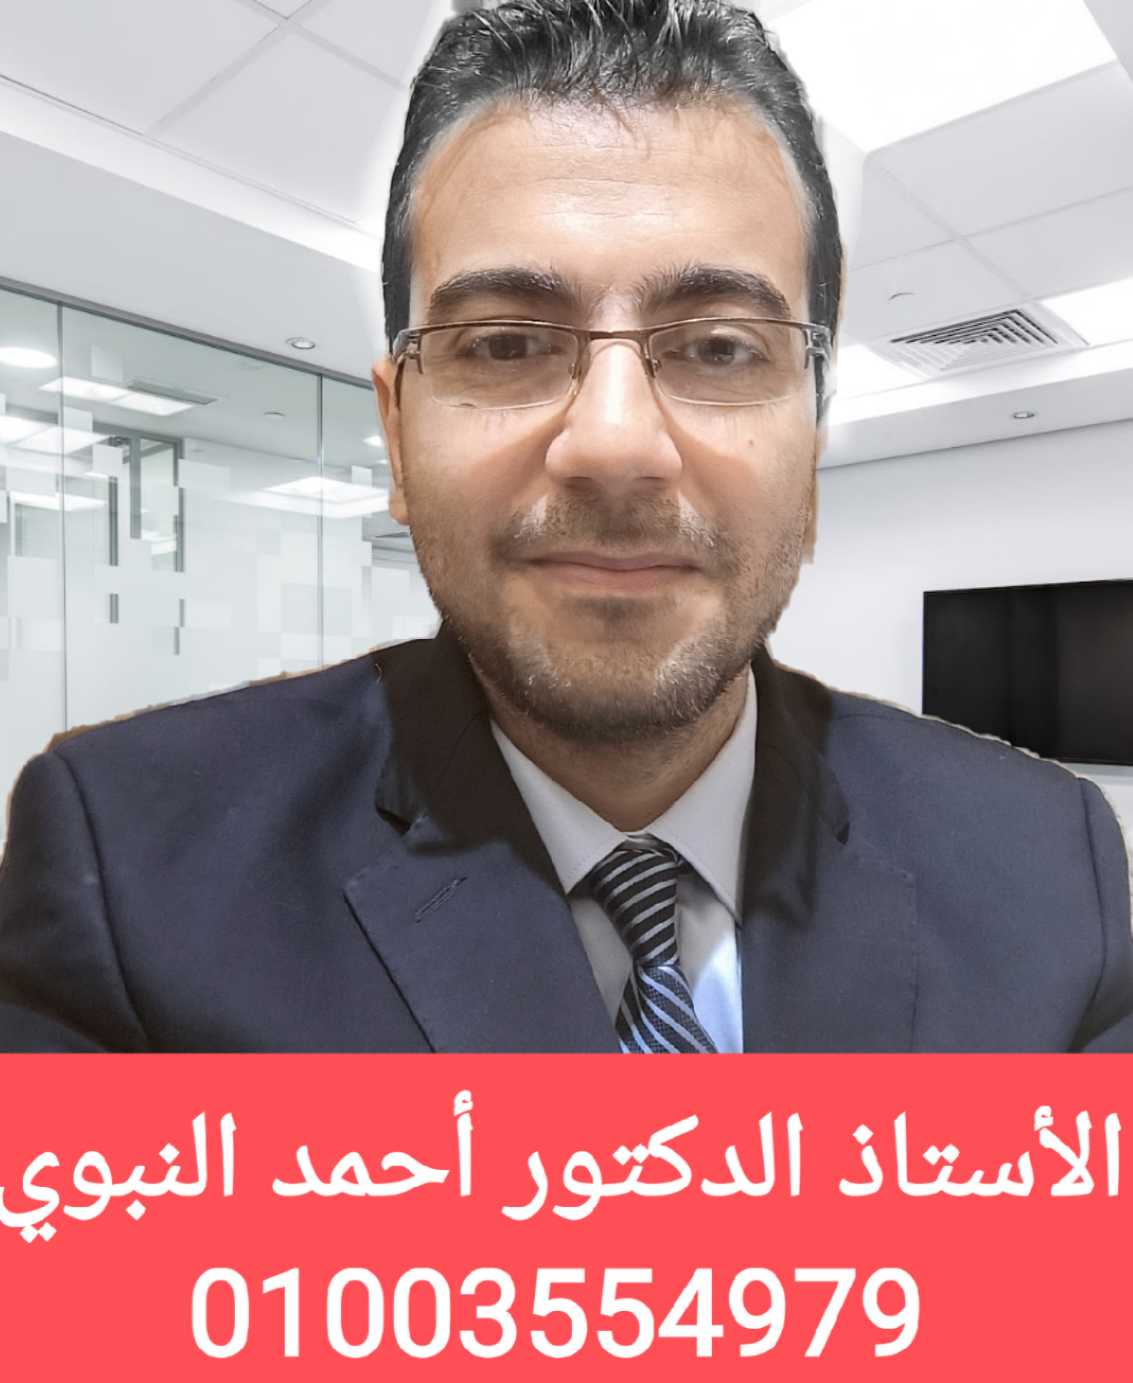 Dr. Ahmed Elnabawy